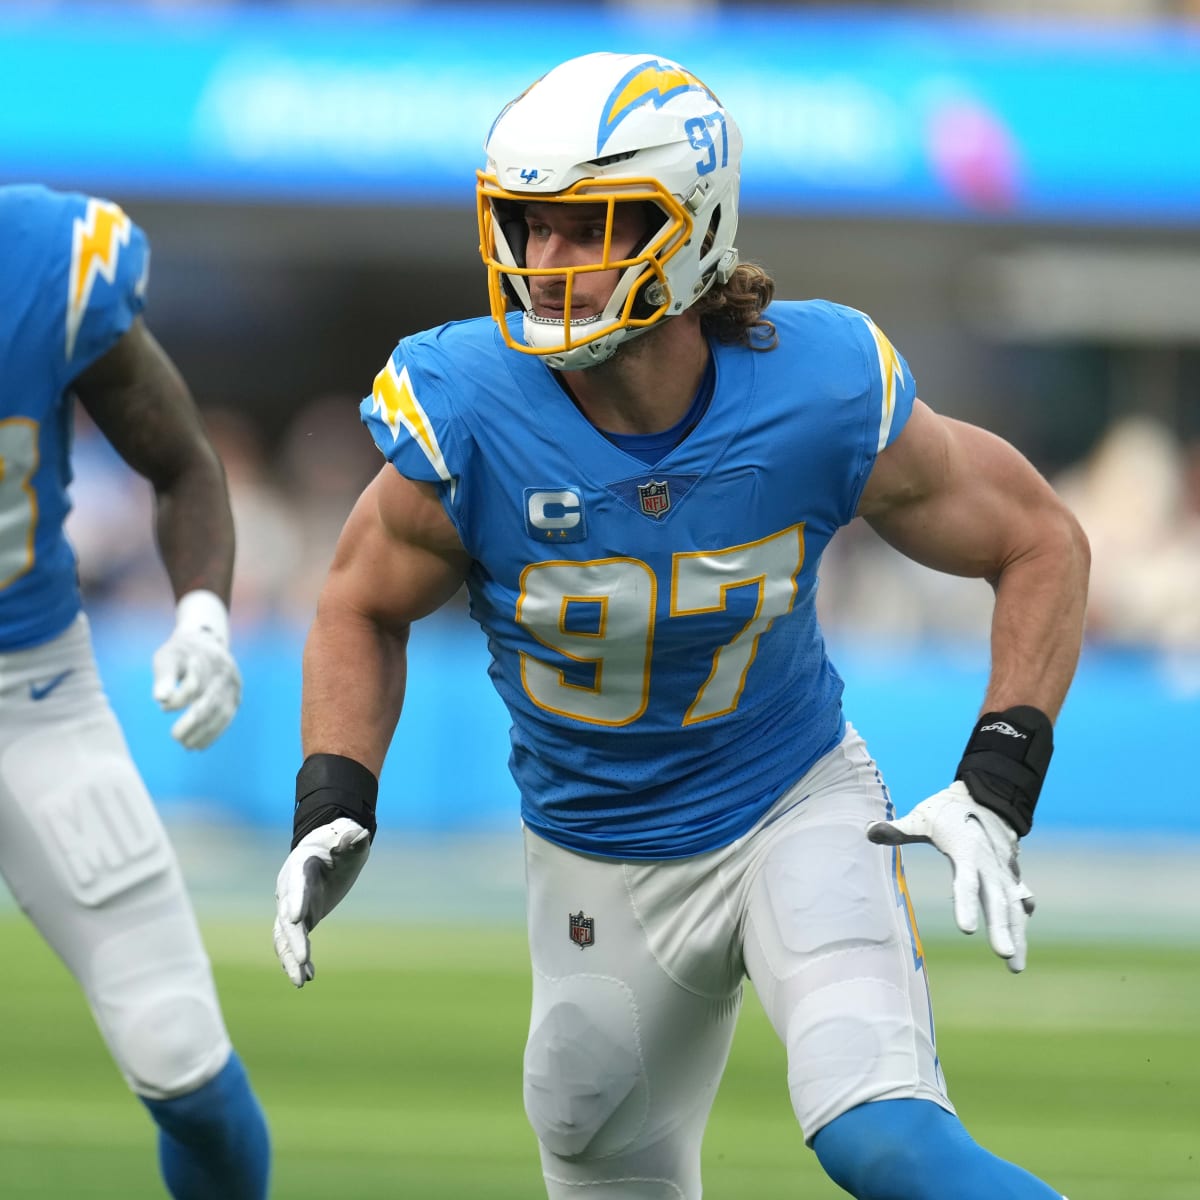 The Outrageous Responses Of Joey Bosa Leaves Public In Shock…